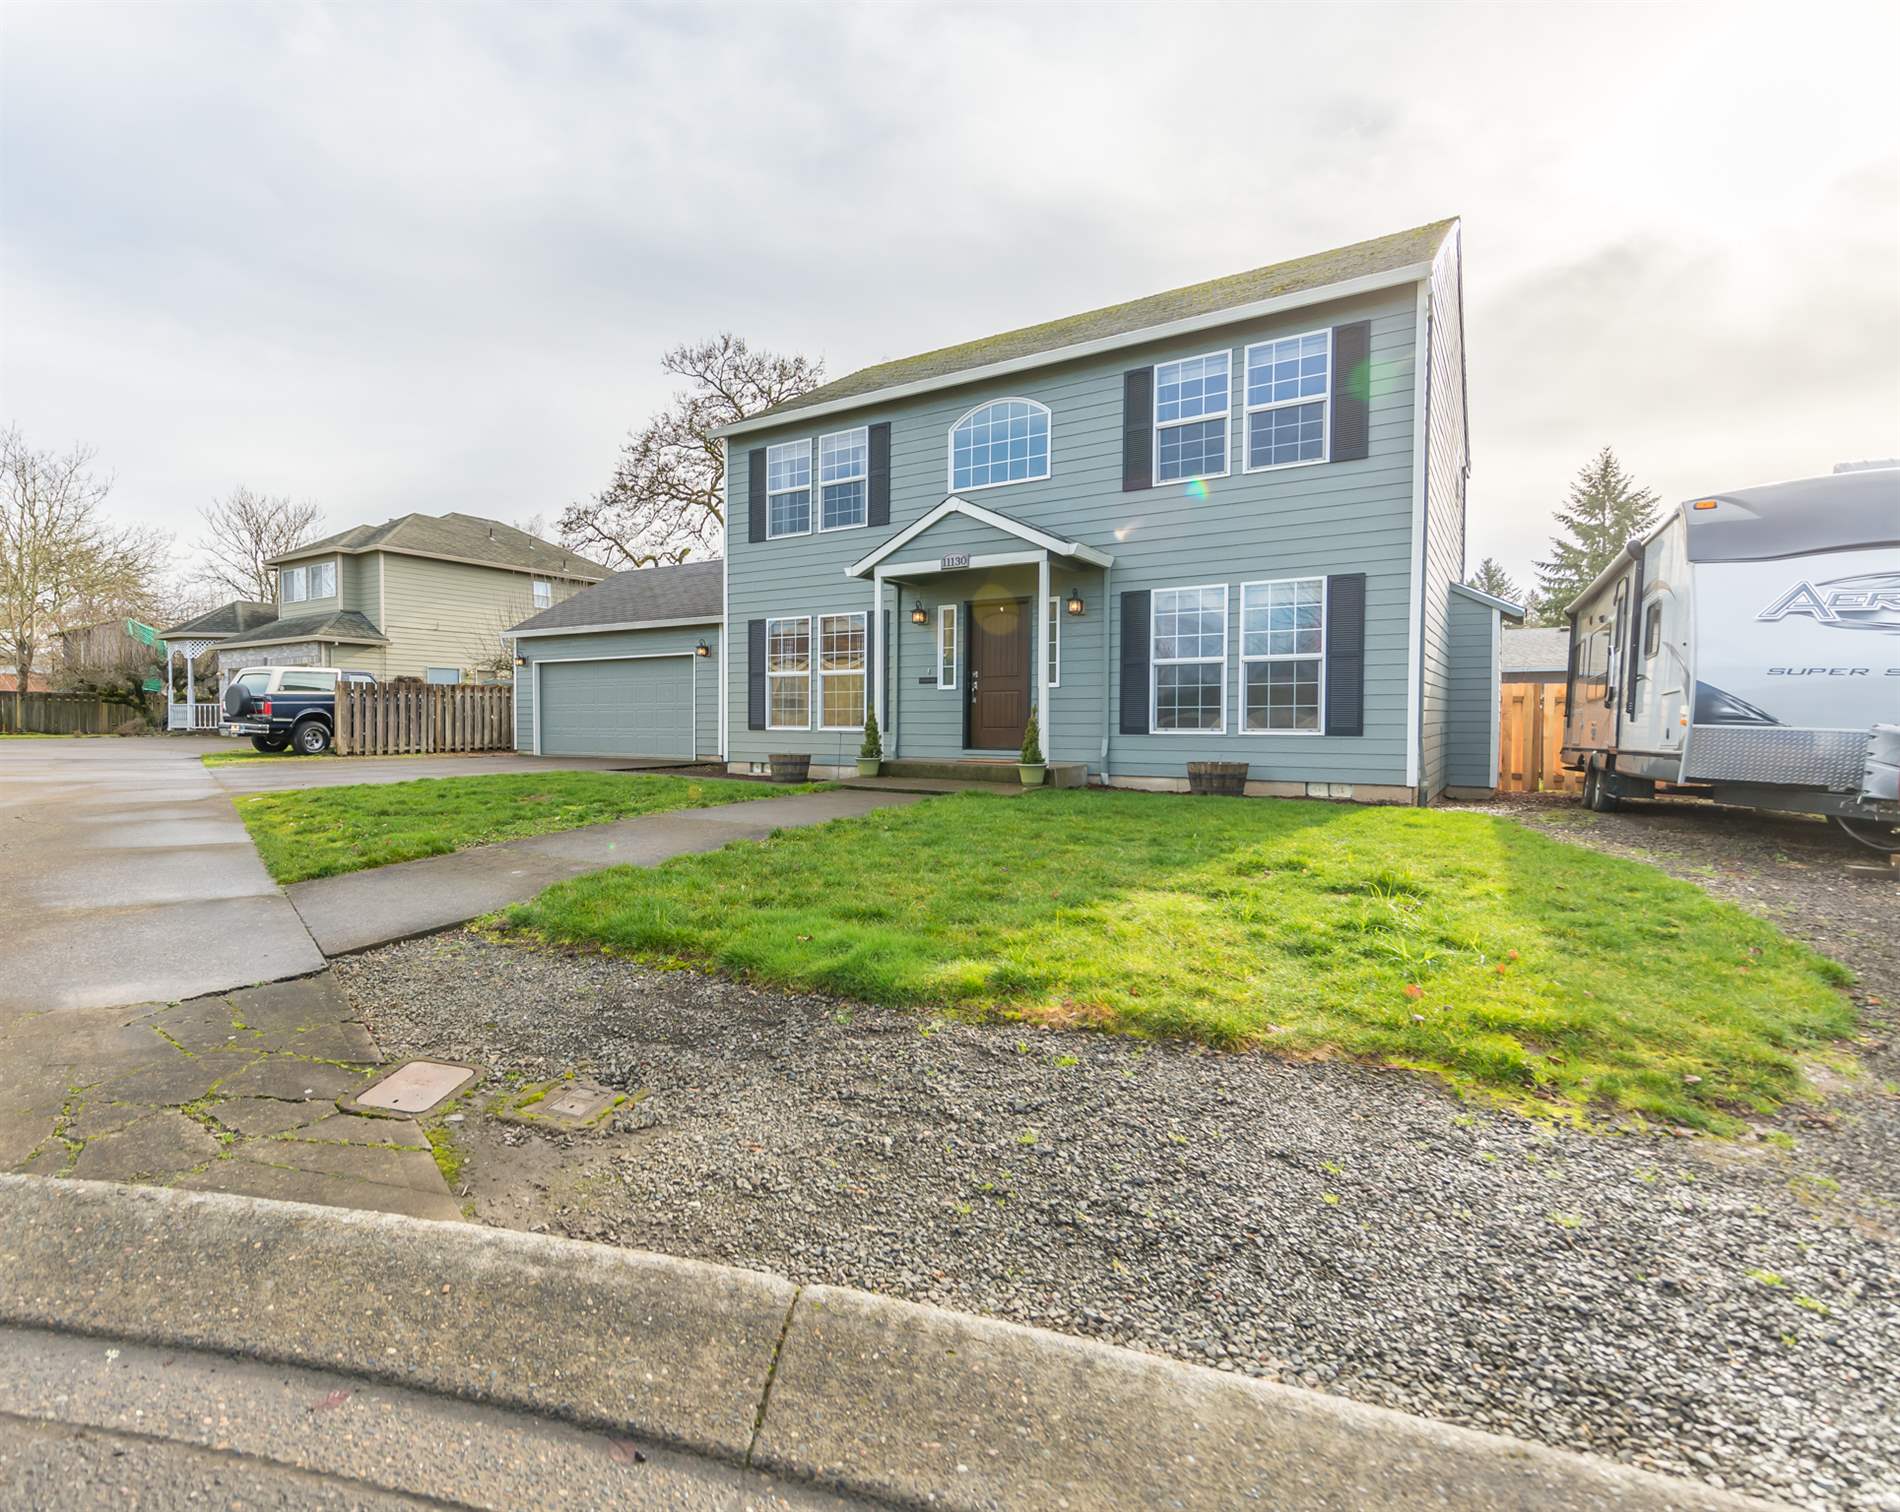 11130 Nw Empress Pl, North Plains, OR 97133